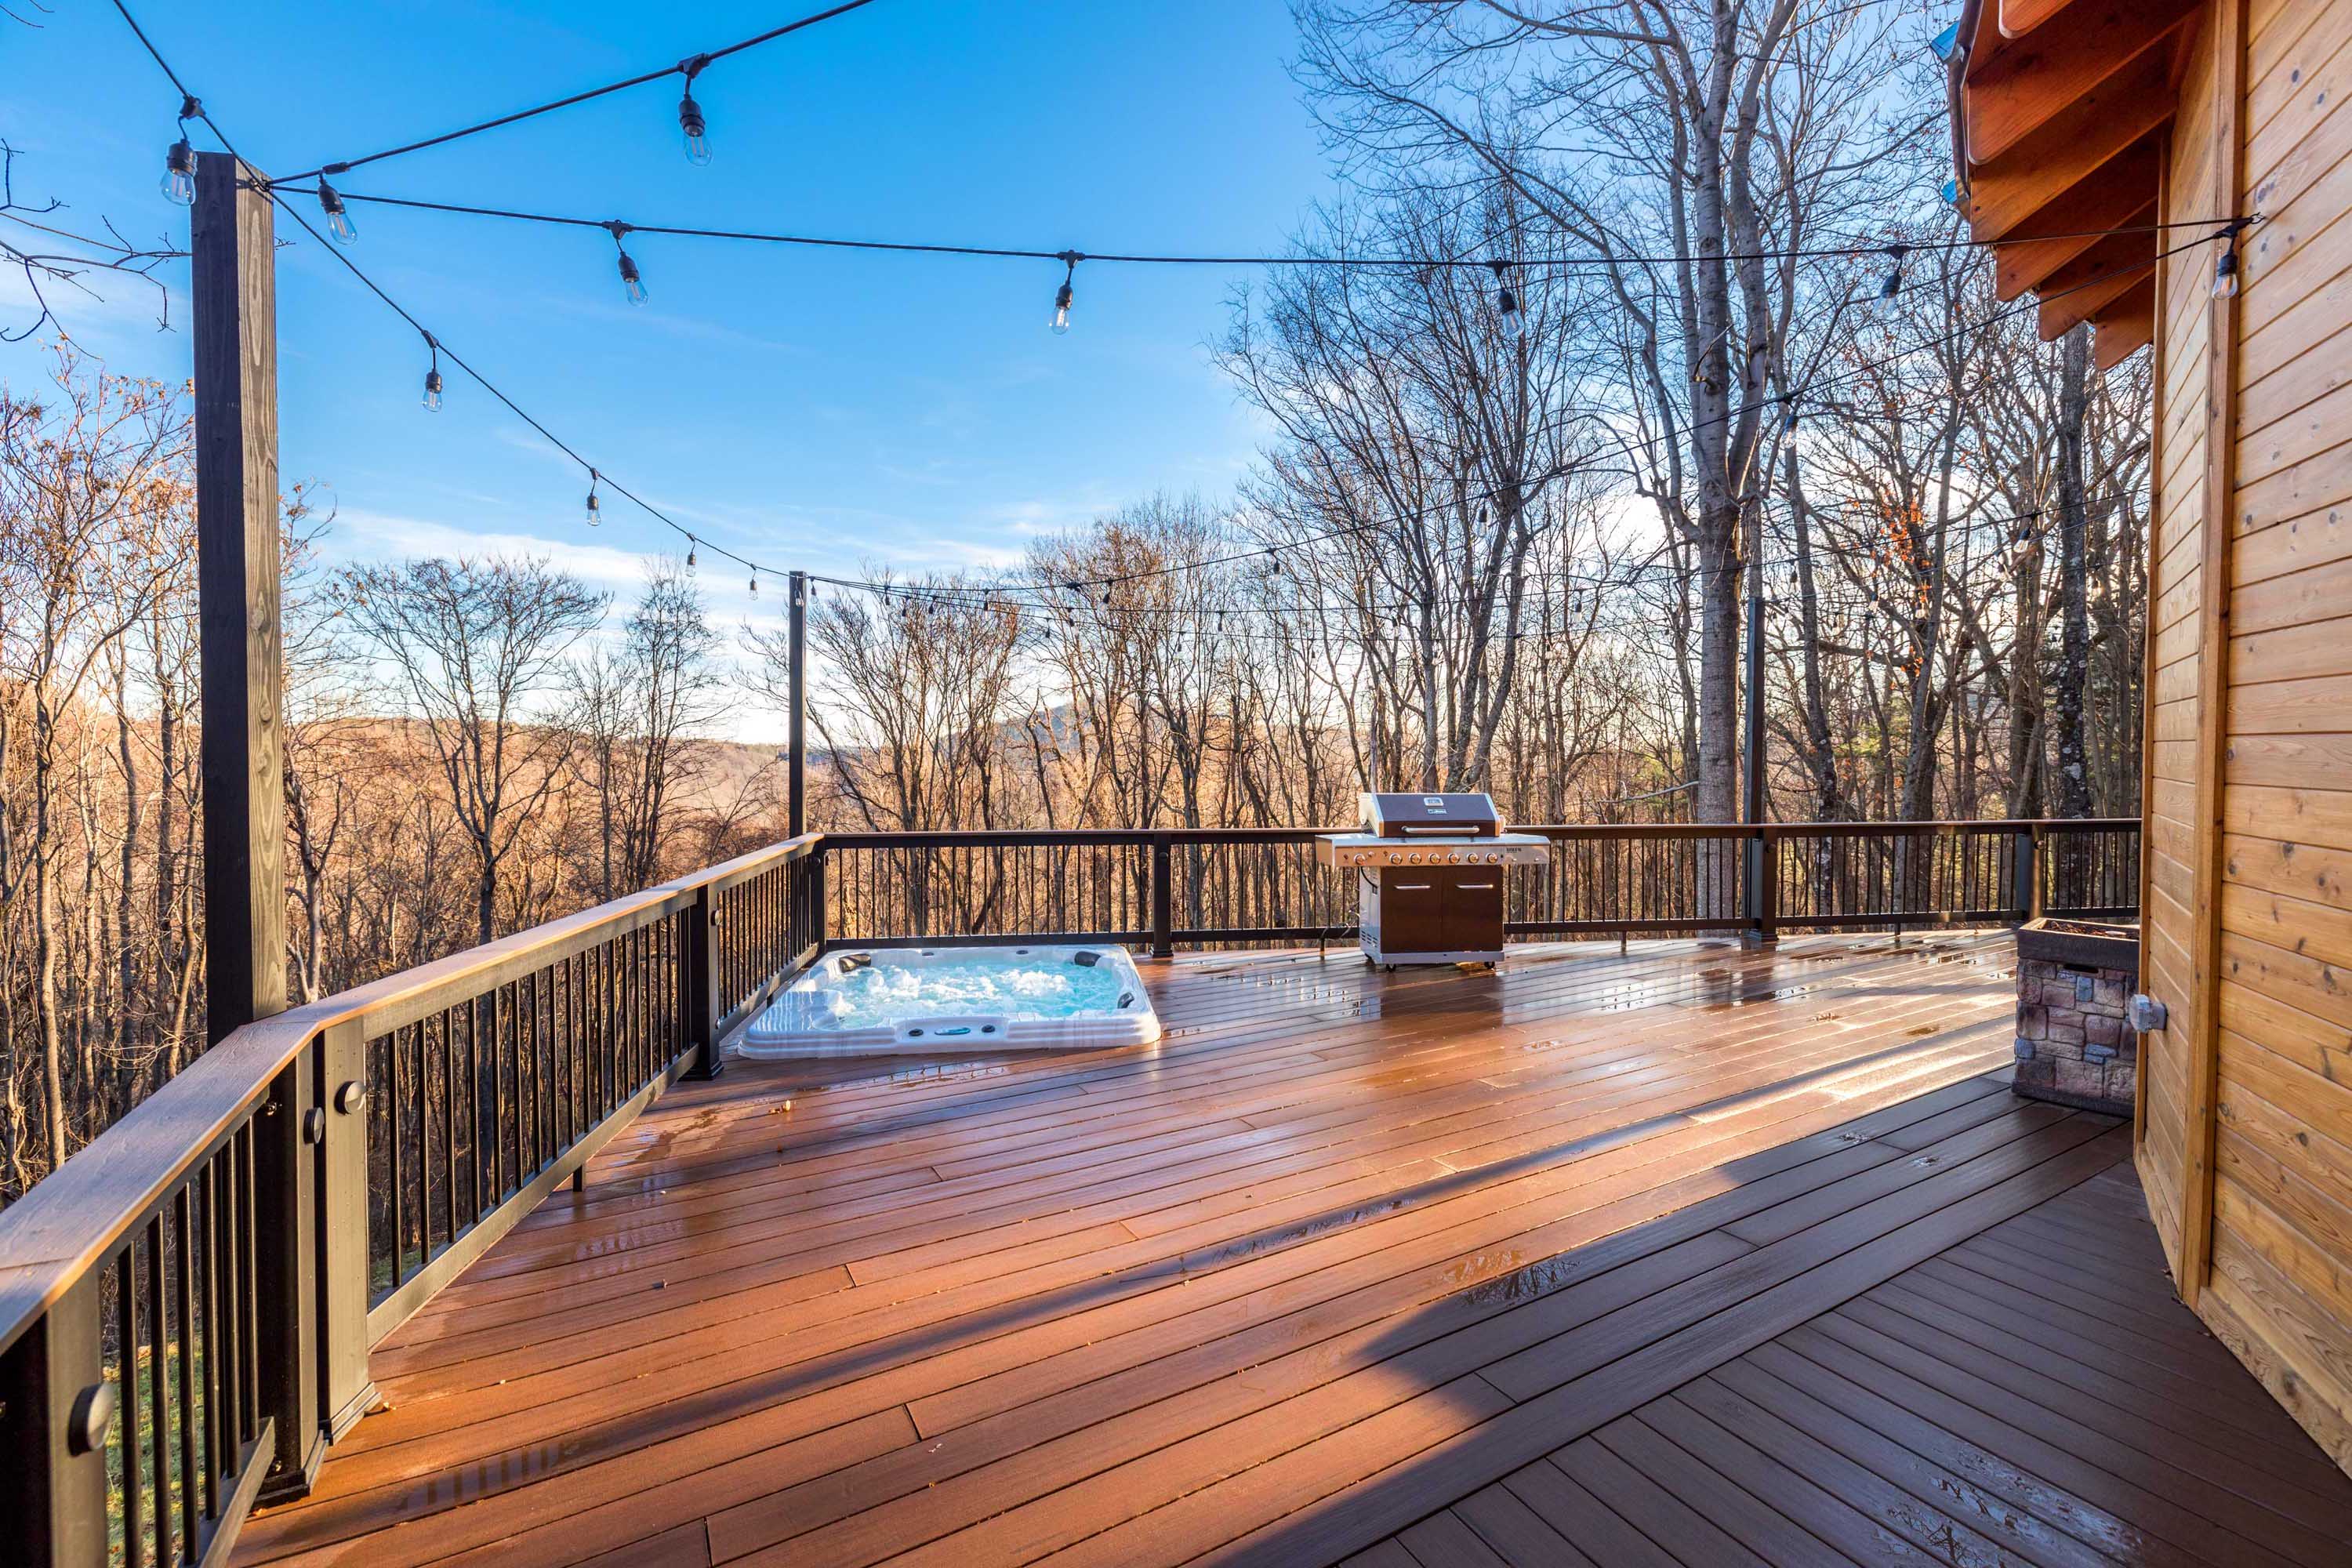 <span  class="uc_style_uc_tiles_grid_image_elementor_uc_items_attribute_title" style="color:#ffffff;">Large deck with string lights, hot tub and grill</span>